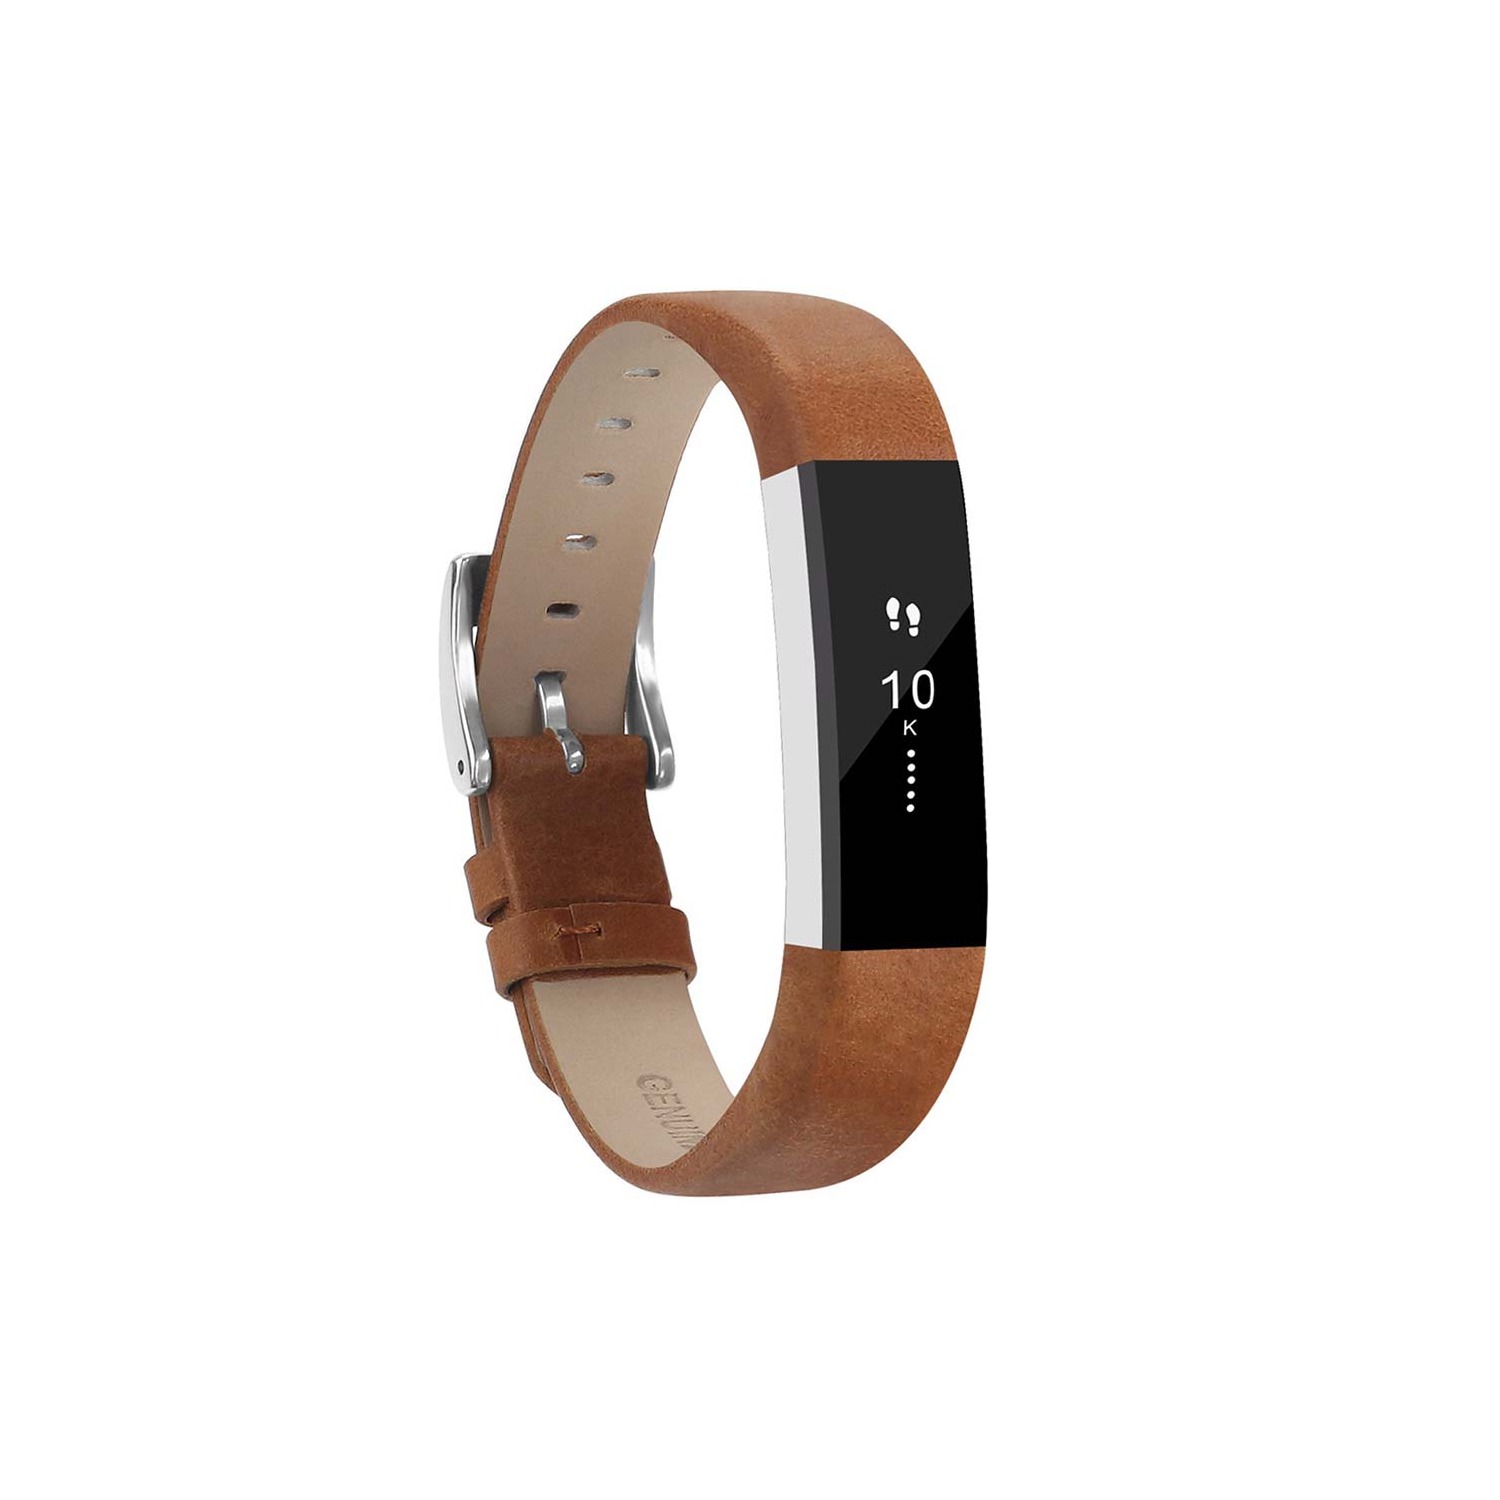 StrapsCo Genuine Leather Replacement Strap Band for Fitbit Alta & HR in Tan